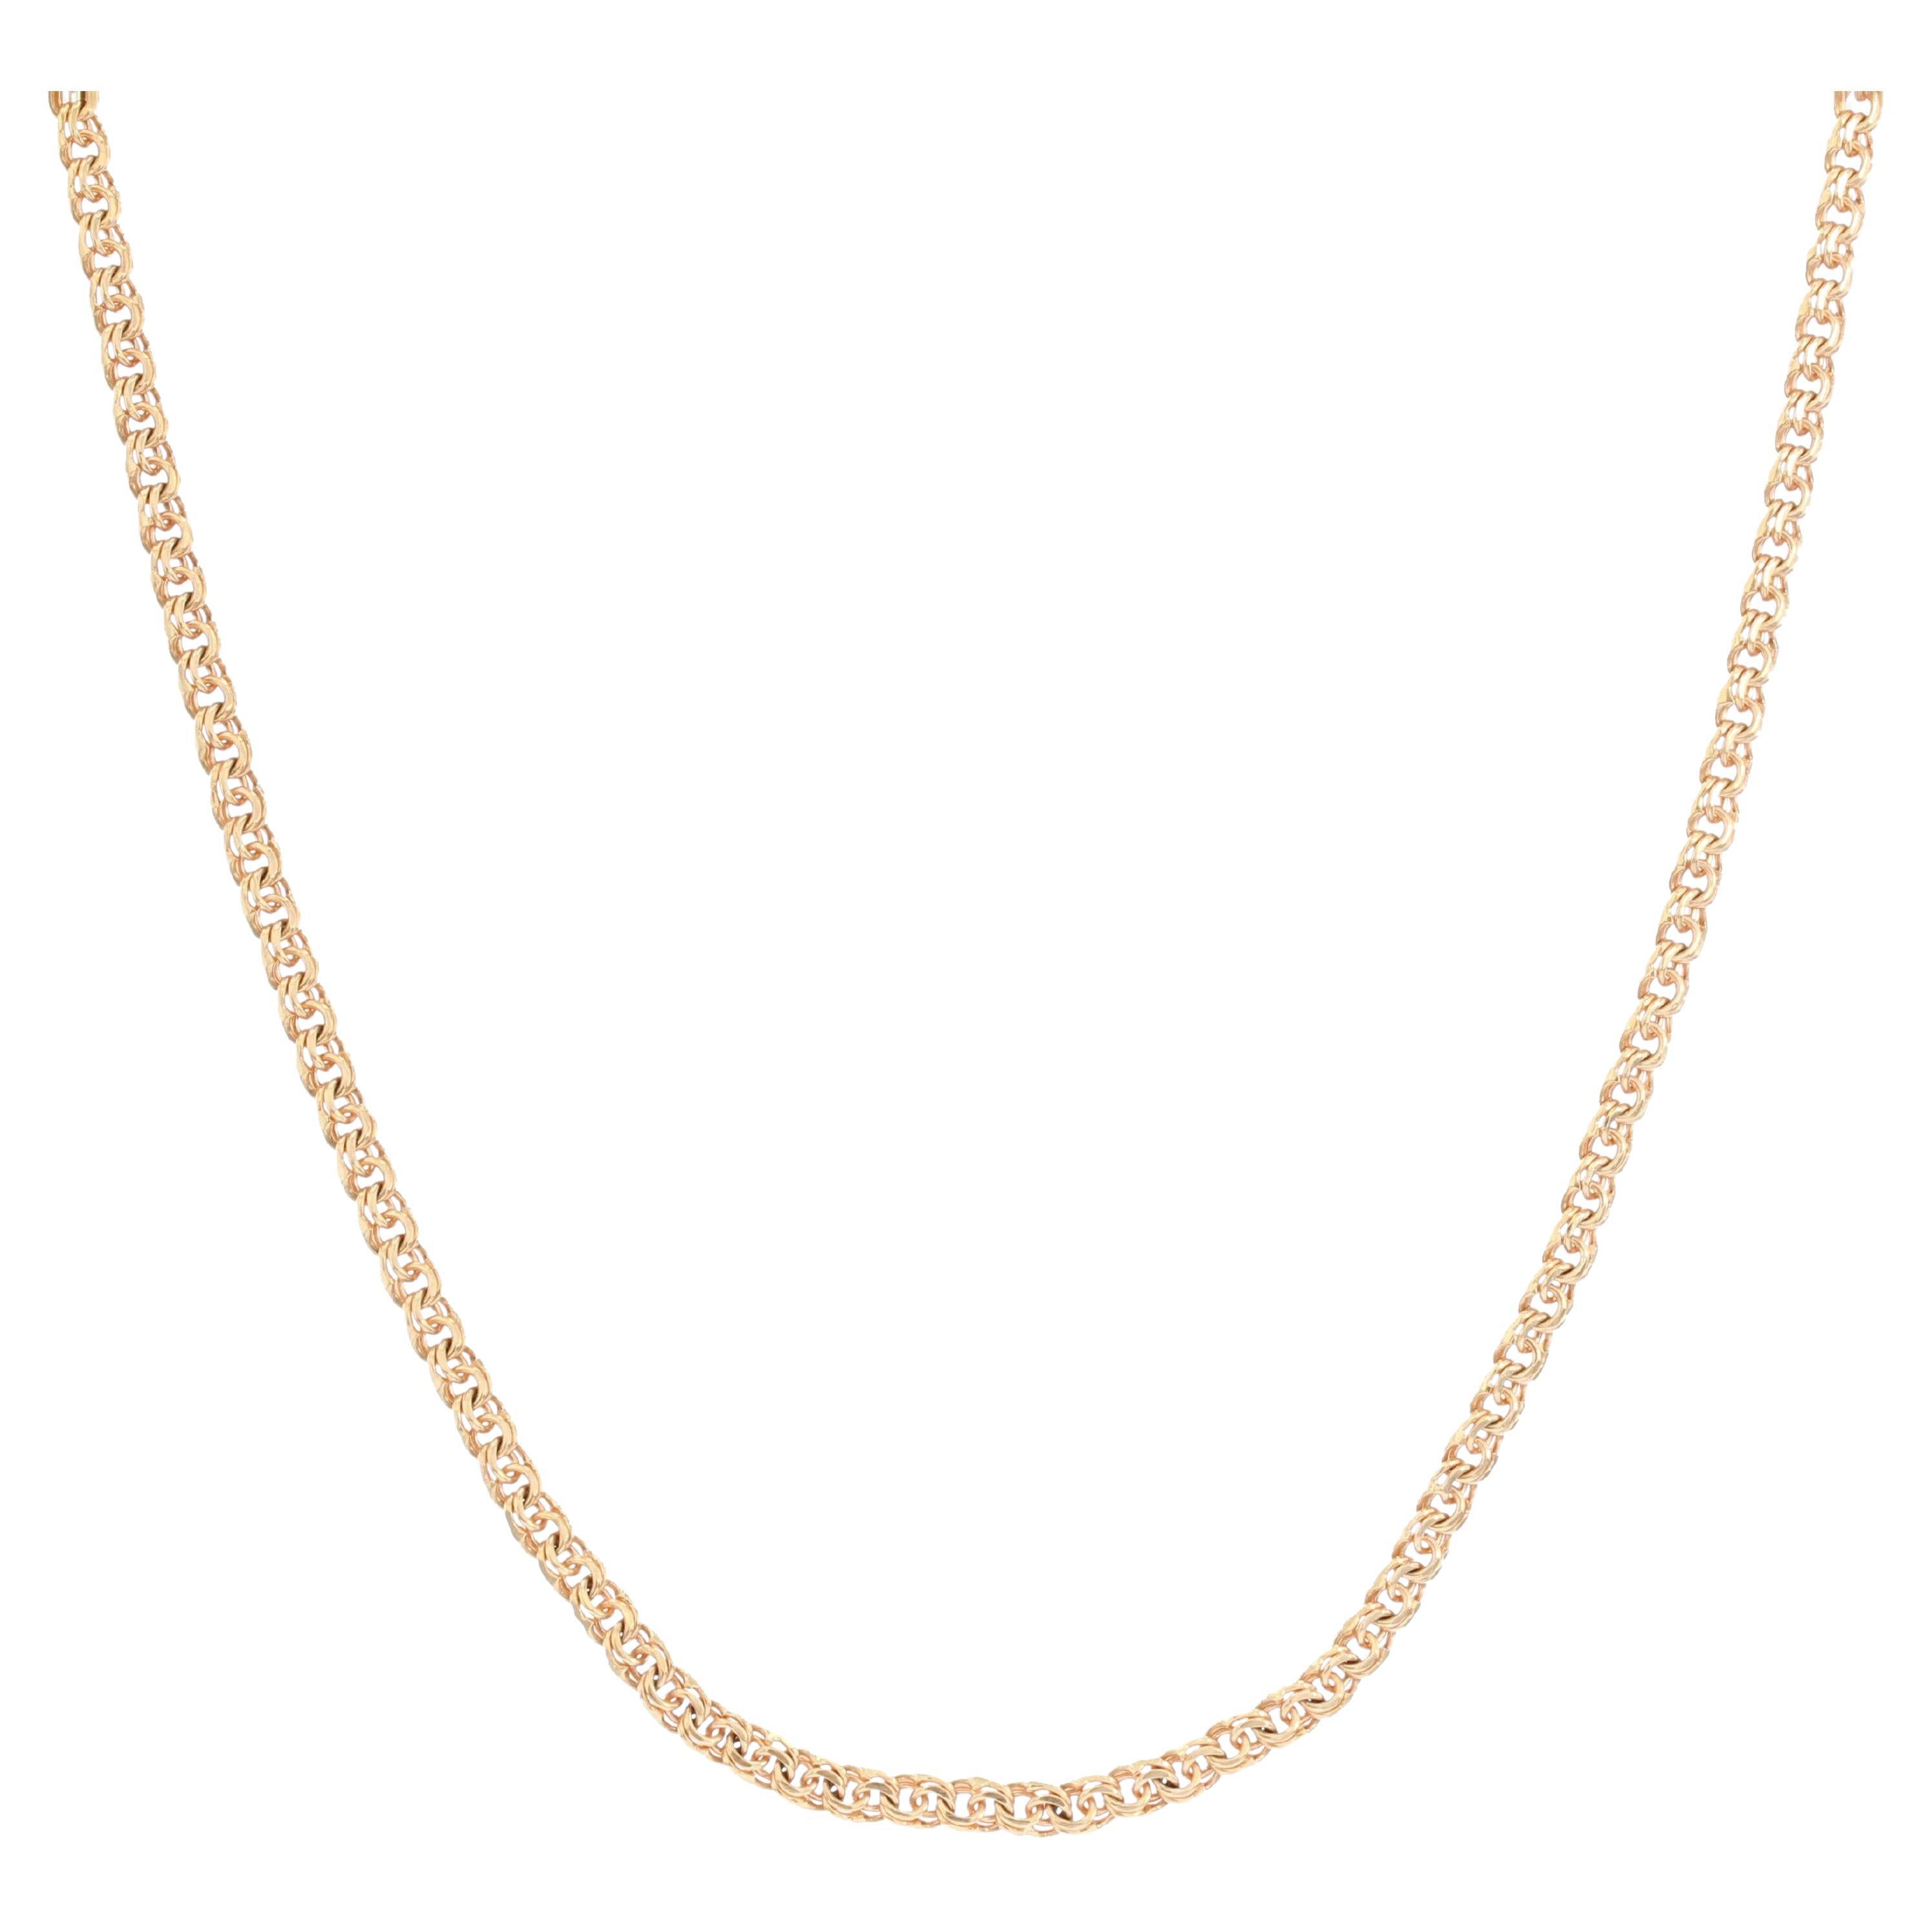 Modern 18 Karat Yellow Gold Chiseled Flatened Convict Mesh Chain For Sale